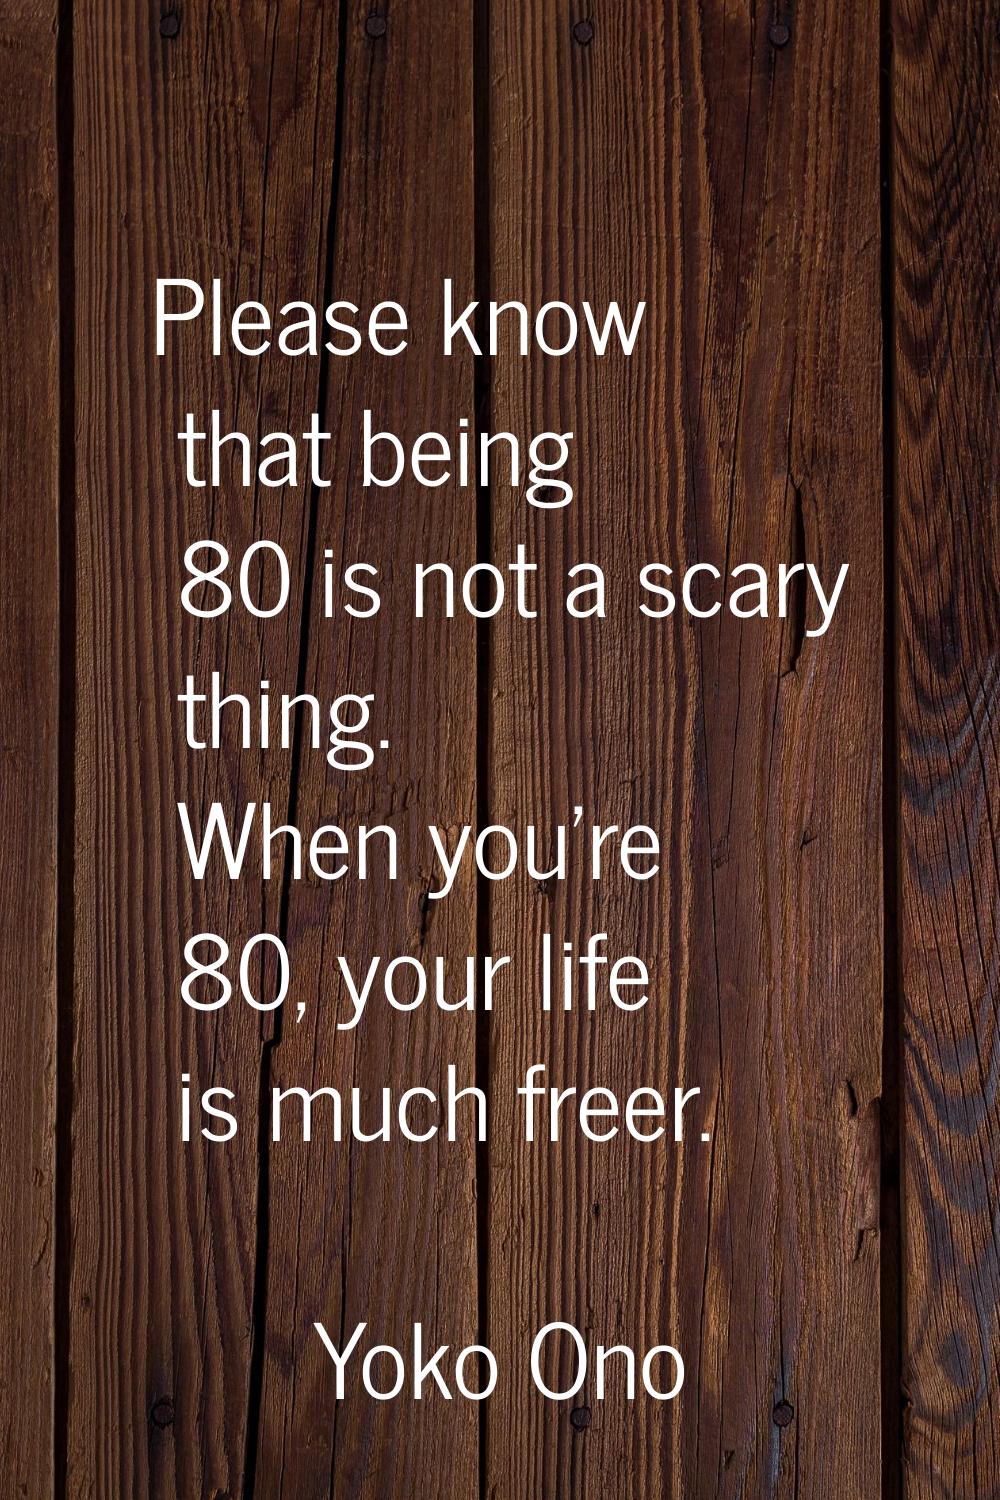 Please know that being 80 is not a scary thing. When you're 80, your life is much freer.